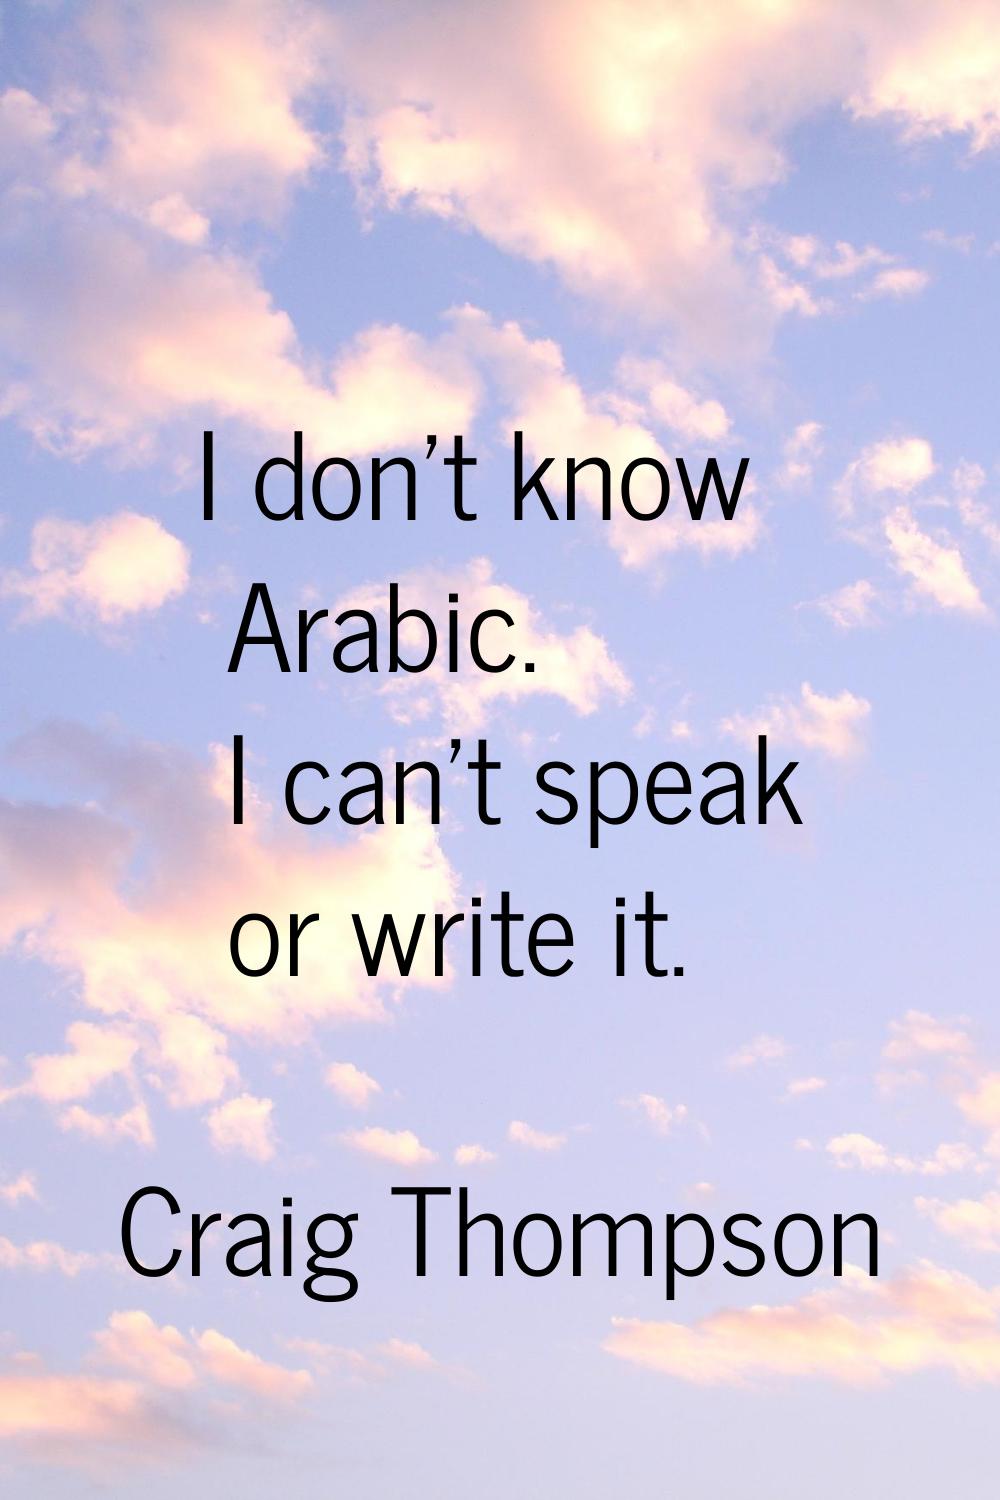 I don't know Arabic. I can't speak or write it.